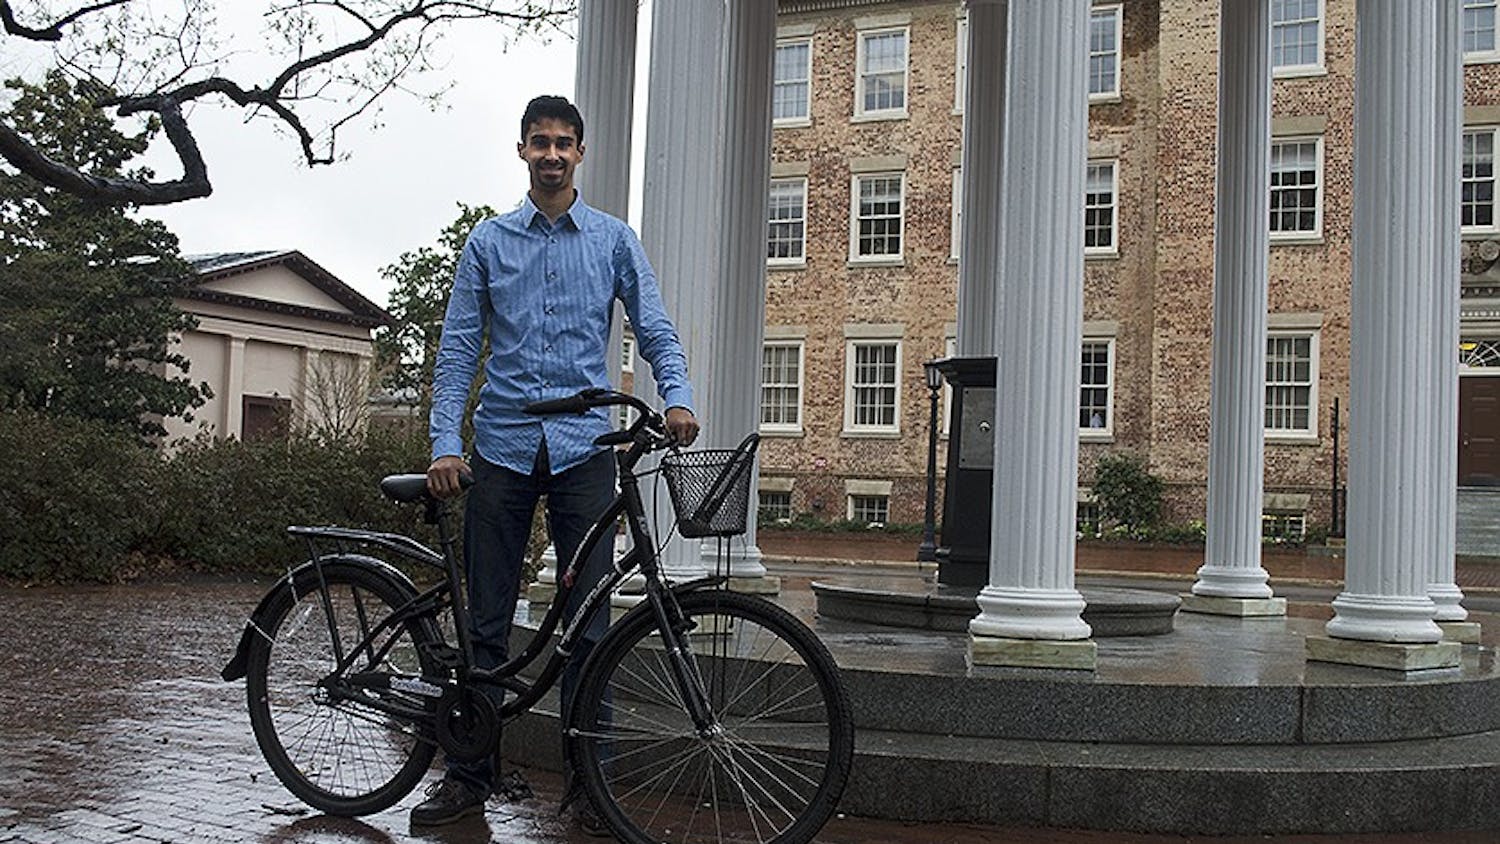 Akhil Jariwala, the director of Tar Heel Bikes Steering Committee and a senior business and environmental science major, is launching a campaign to promote positive cycling at UNC.  This campaign will begin Tuesday, April 8, 2014 in association with Student Government, and Jariwala is hoping for 2,000 signatures in a two week time span.  This program provides one-way bike trips across campus similar to New York City's Citibike.